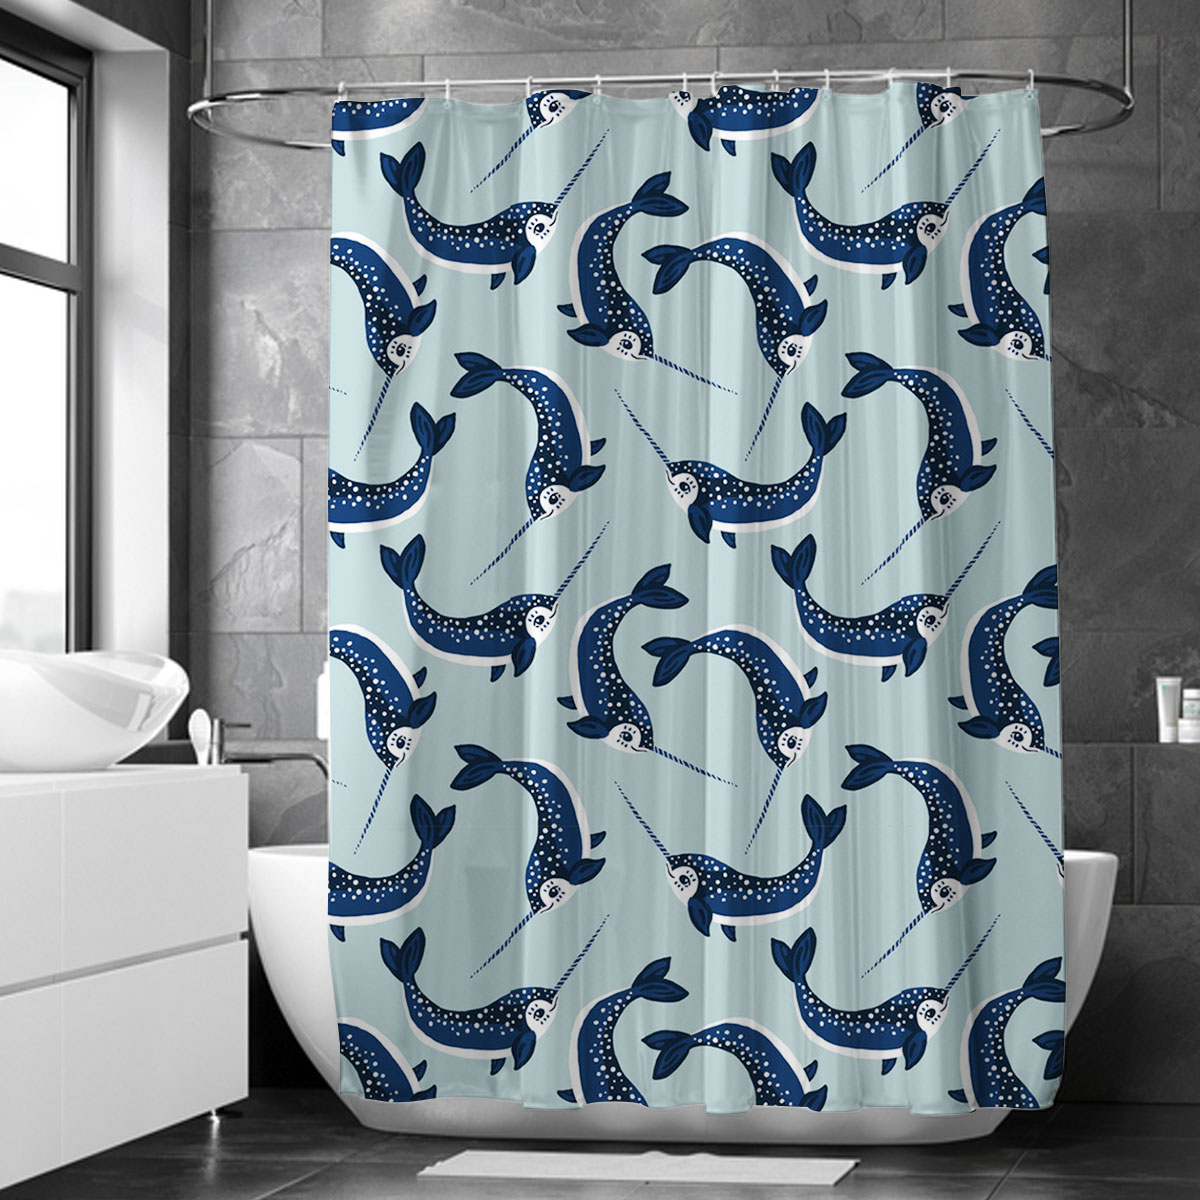 Lovely Blue Narwhal Shower Curtain